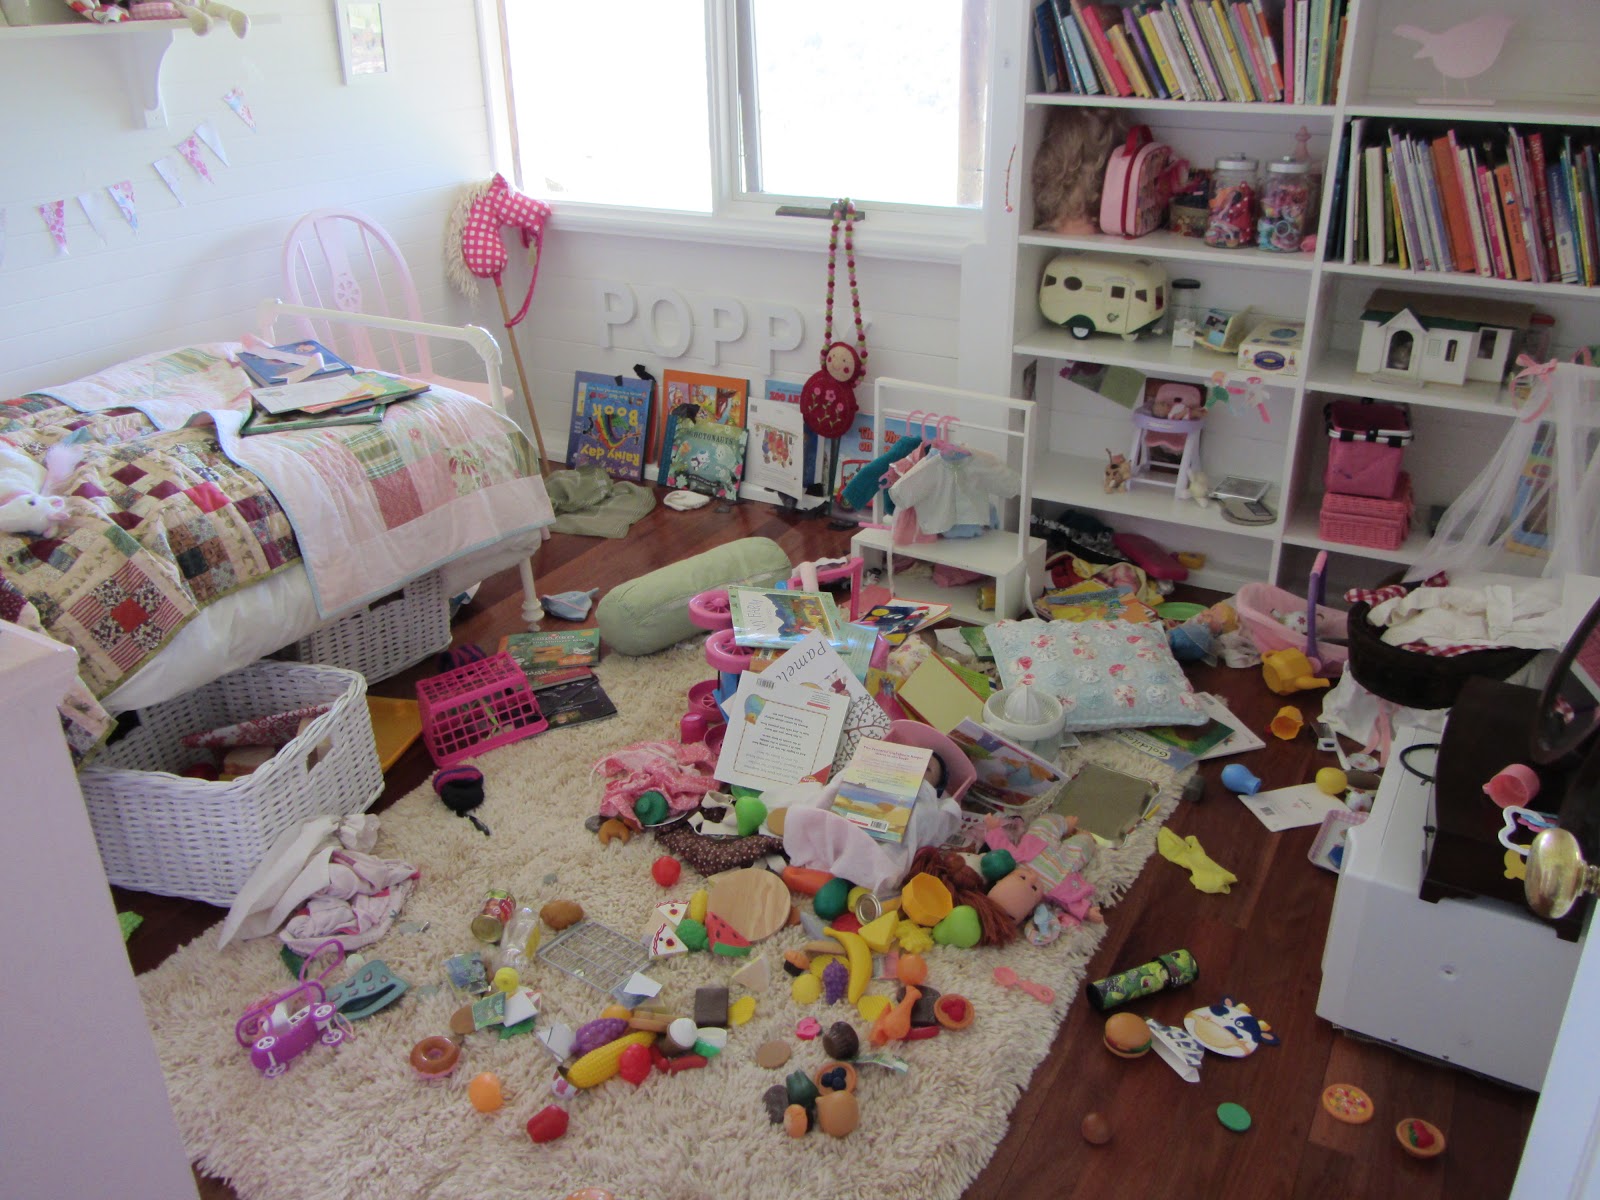 She made my room. Уборка игрушек. Детская комната игрушки хаос. Tidy Room and messy Room. Tidy messy Bedroom.